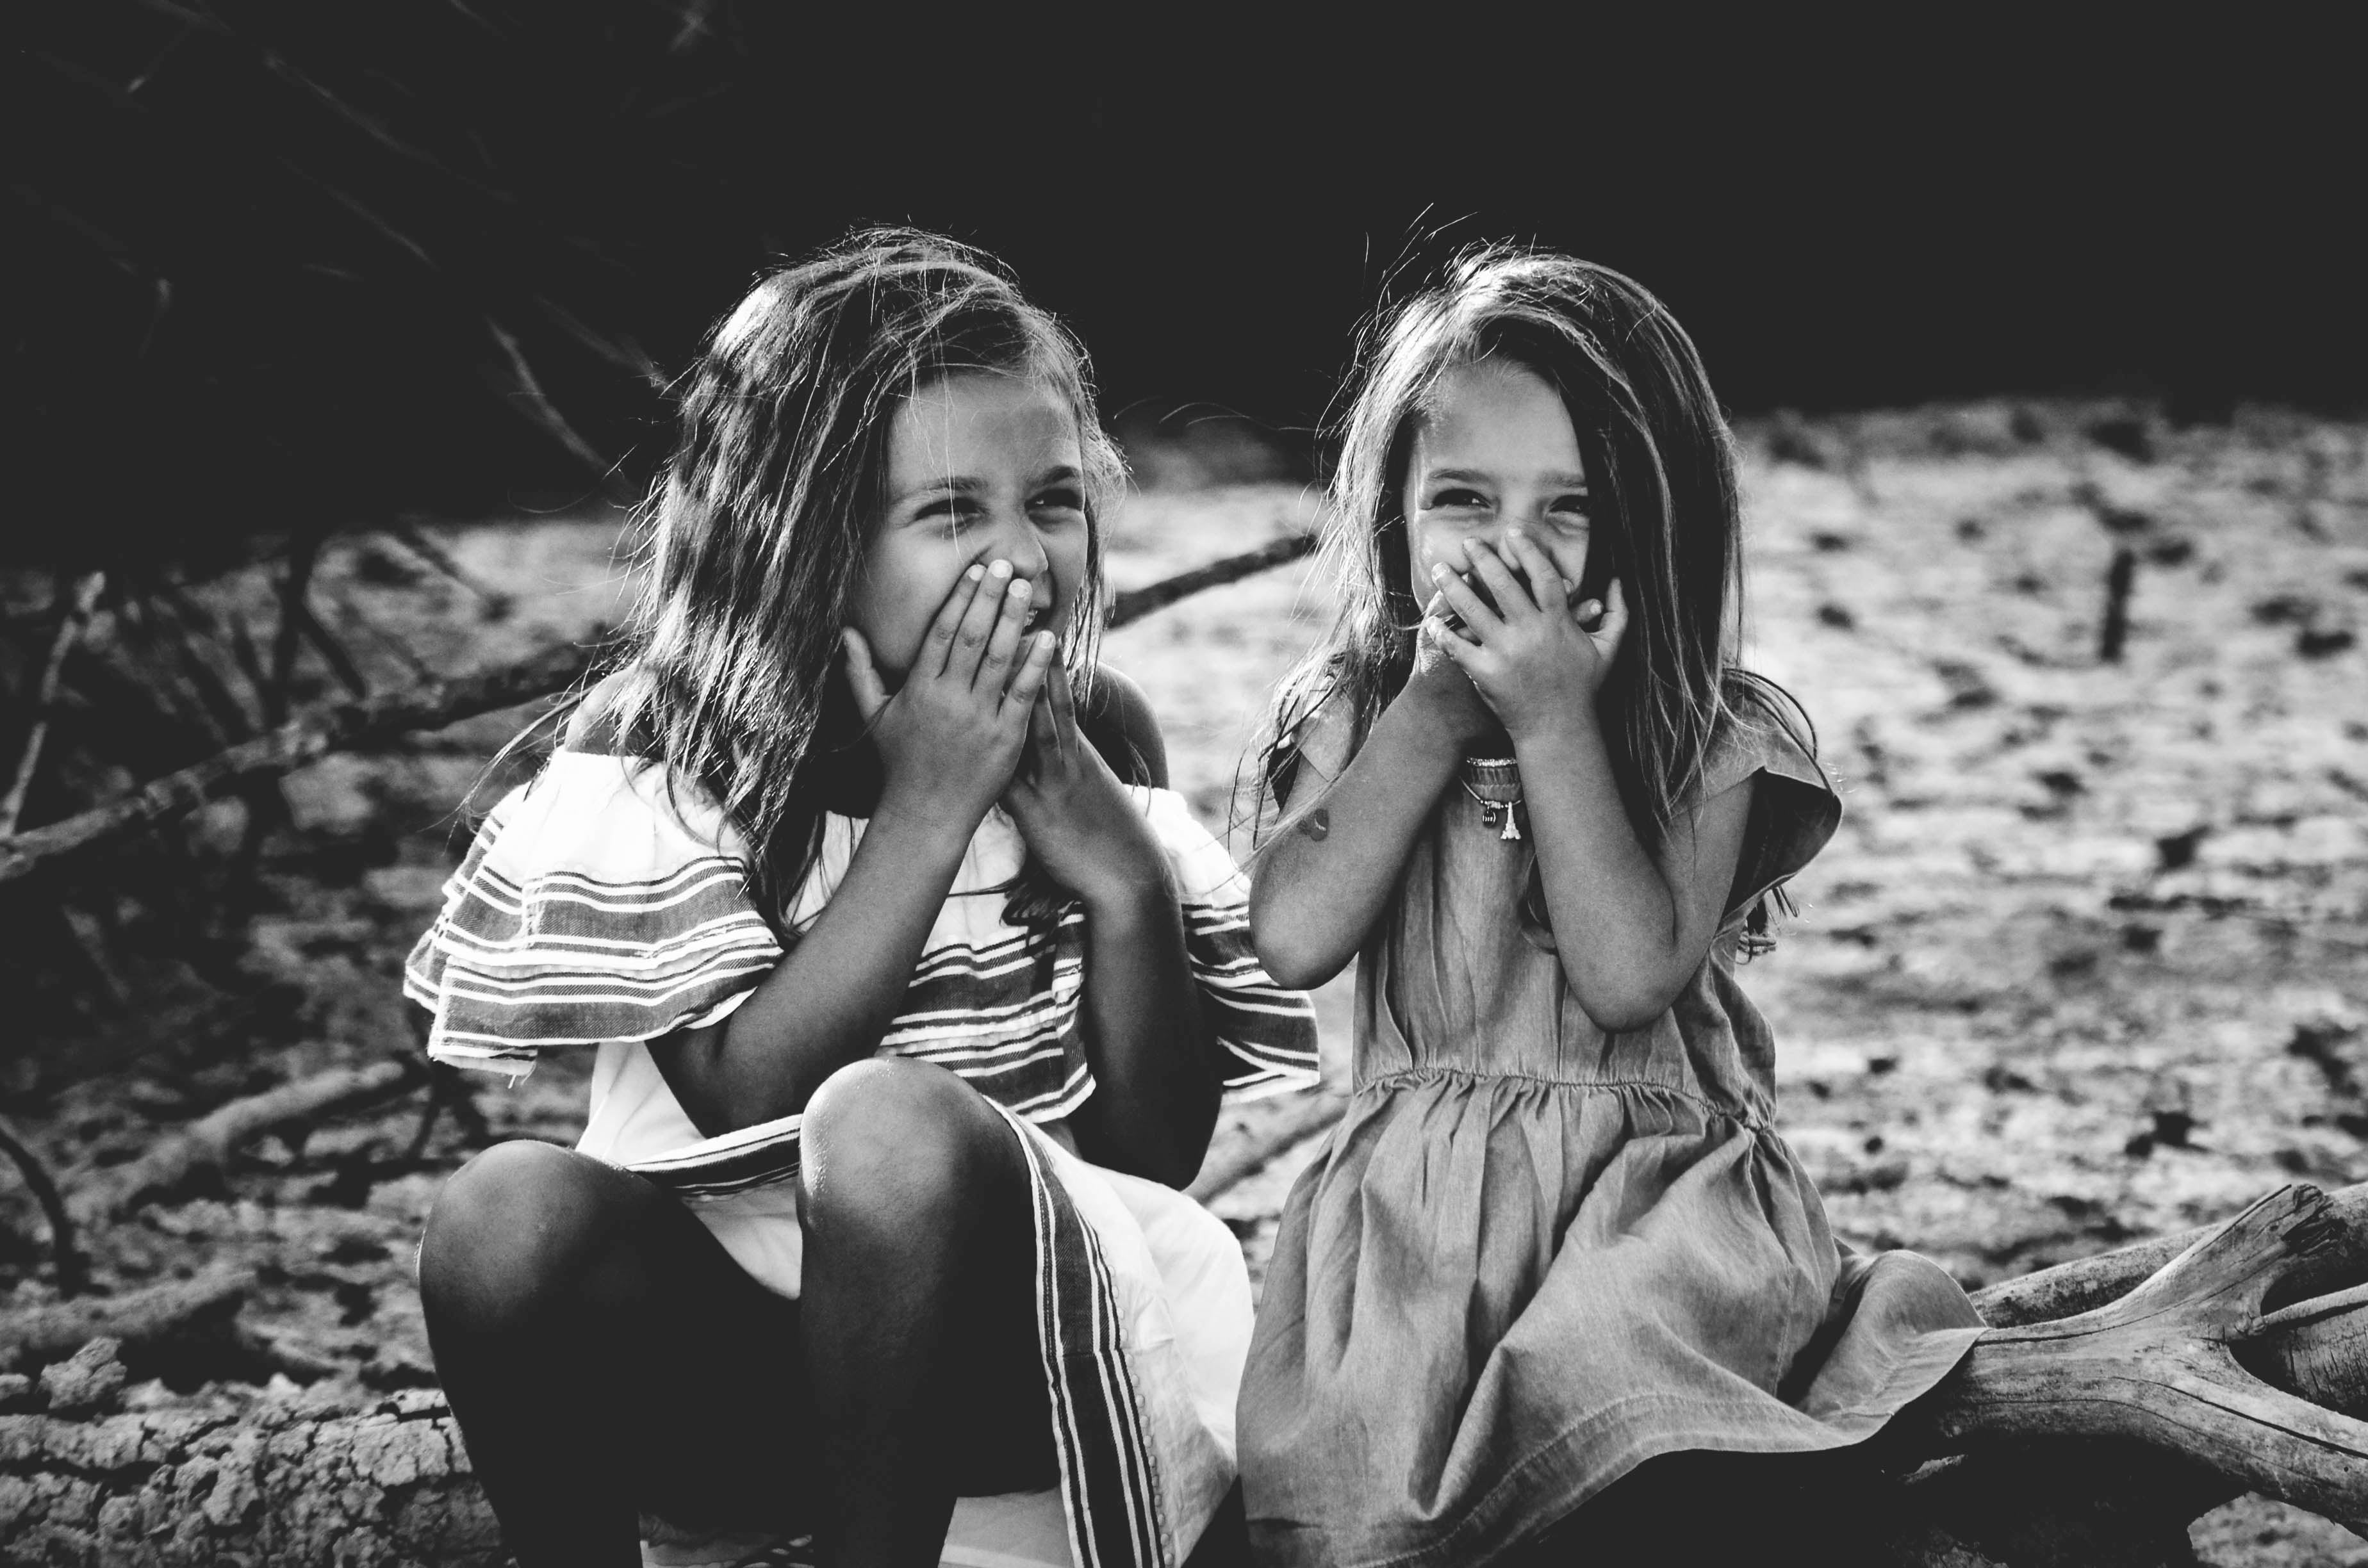 Black & White Image of Two Little Girls Smiling and Laughing - Sibling Photo Ideas